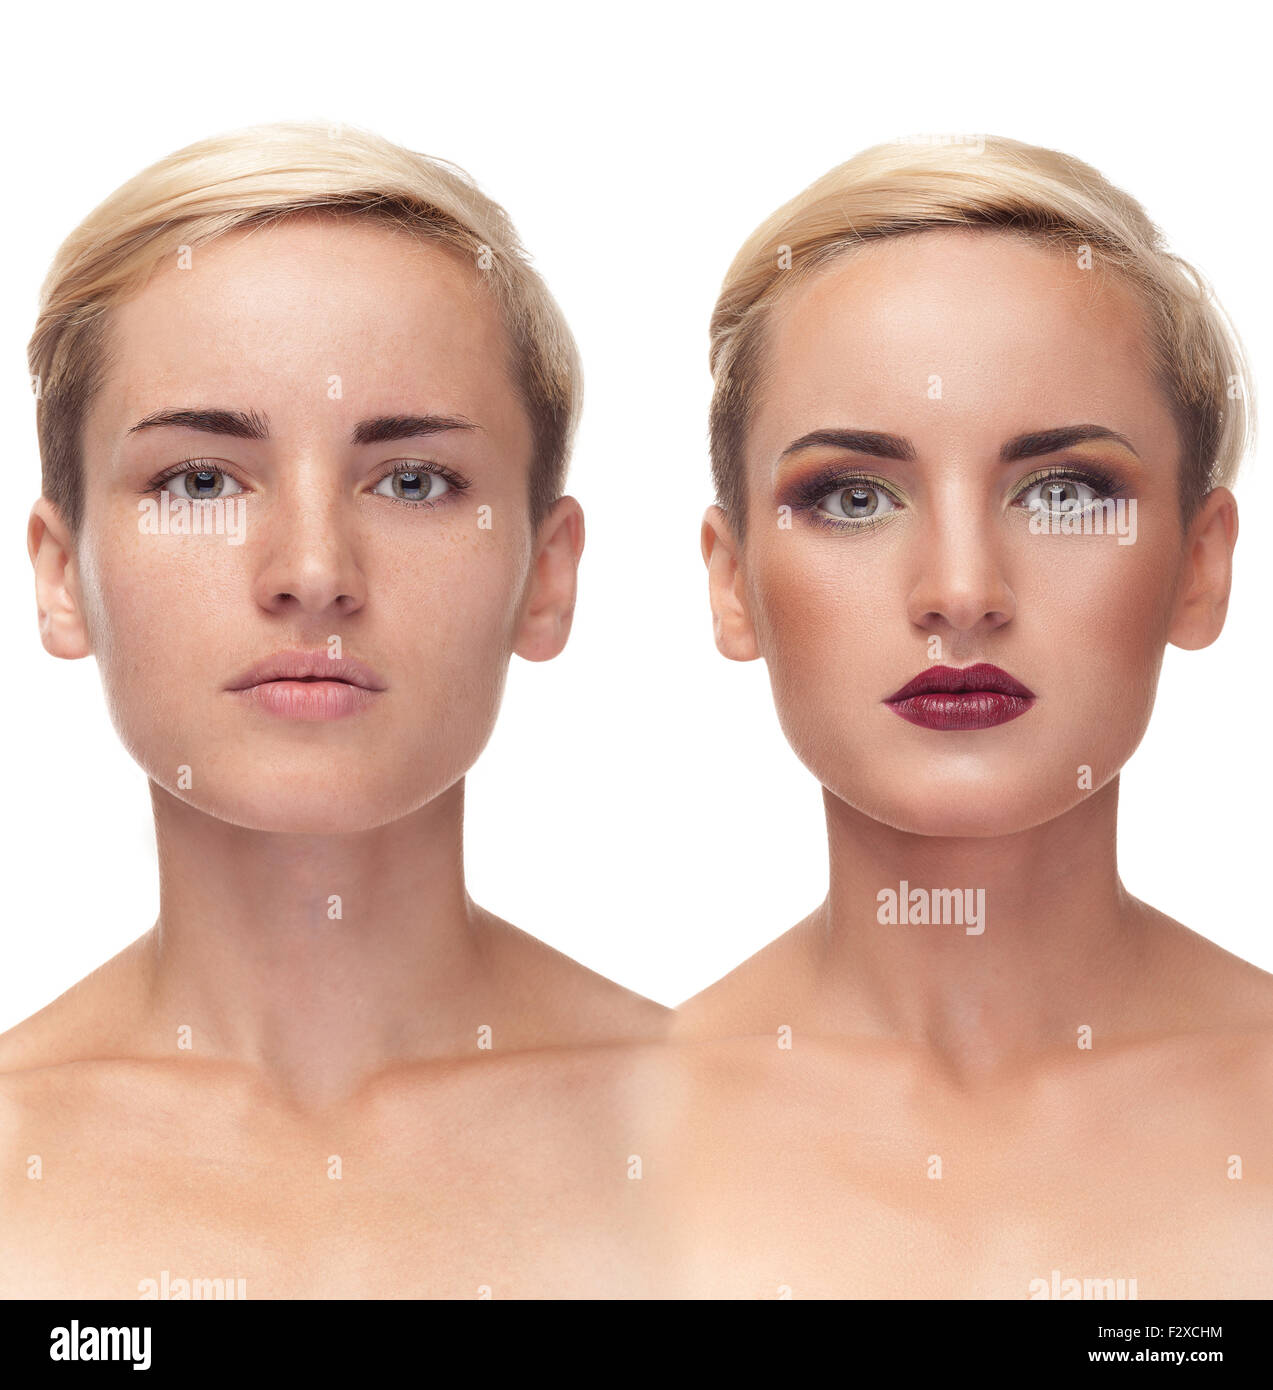 Girl with and without make up before after concept. Studio shooting. Same girl without make up and with it. Over white backgroun Stock Photo